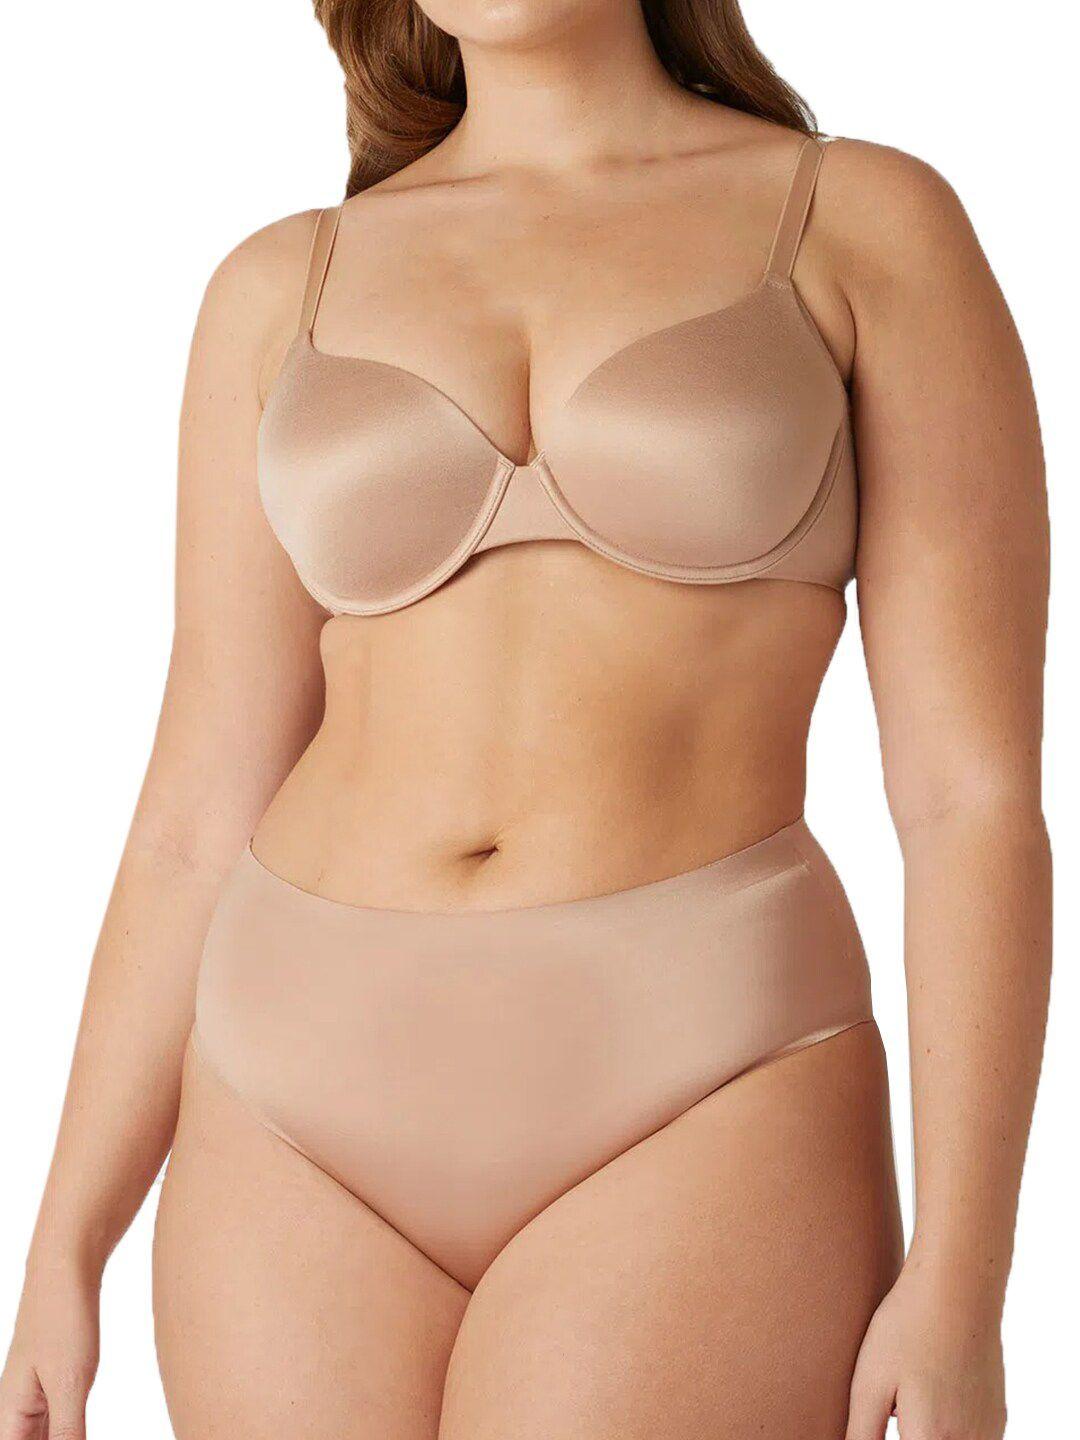 yamamay underwired non padded full coverage 360 degree support balconette bra